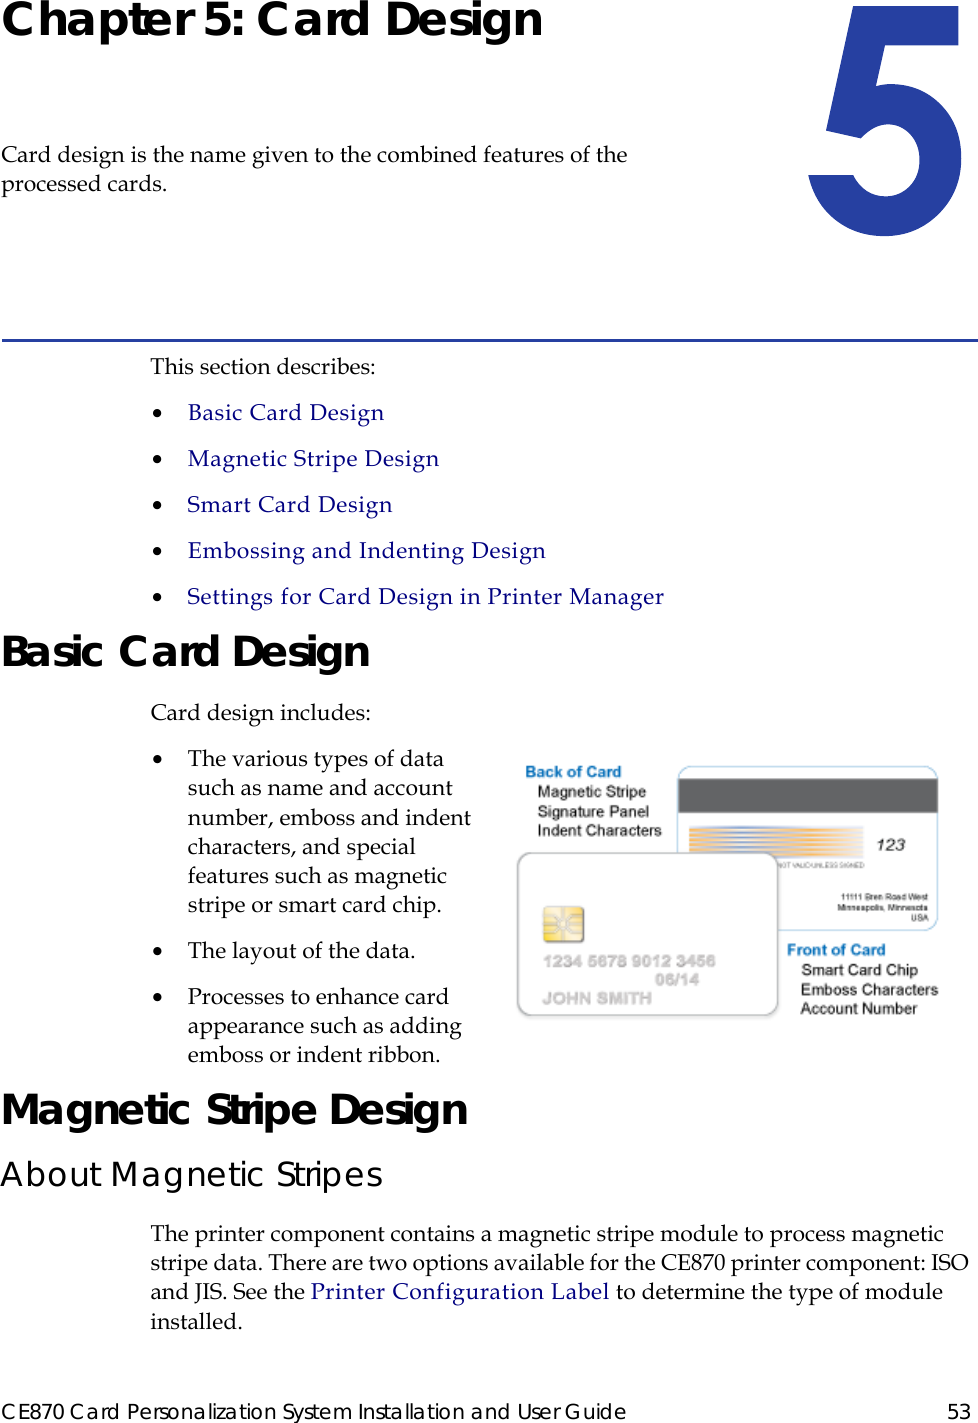 CE870 Card Personalization System Installation and User Guide 53Chapter 5: Card DesignCard design is the name given to the combined features of the processed cards.This section describes:•  Basic Card Design•  Magnetic Stripe Design•  Smart Card Design•  Embossing and Indenting Design•  Settings for Card Design in Printer ManagerBasic Card DesignCard design includes:•  The various types of data such as name and account number, emboss and indent characters, and special features such as magnetic stripe or smart card chip.•  The layout of the data.•  Processes to enhance card appearance such as adding emboss or indent ribbon.Magnetic Stripe DesignAbout Magnetic StripesThe printer component contains a magnetic stripe module to process magnetic stripe data. There are two options available for the CE870 printer component: ISO and JIS. See the Printer Configuration Label to determine the type of module installed. 